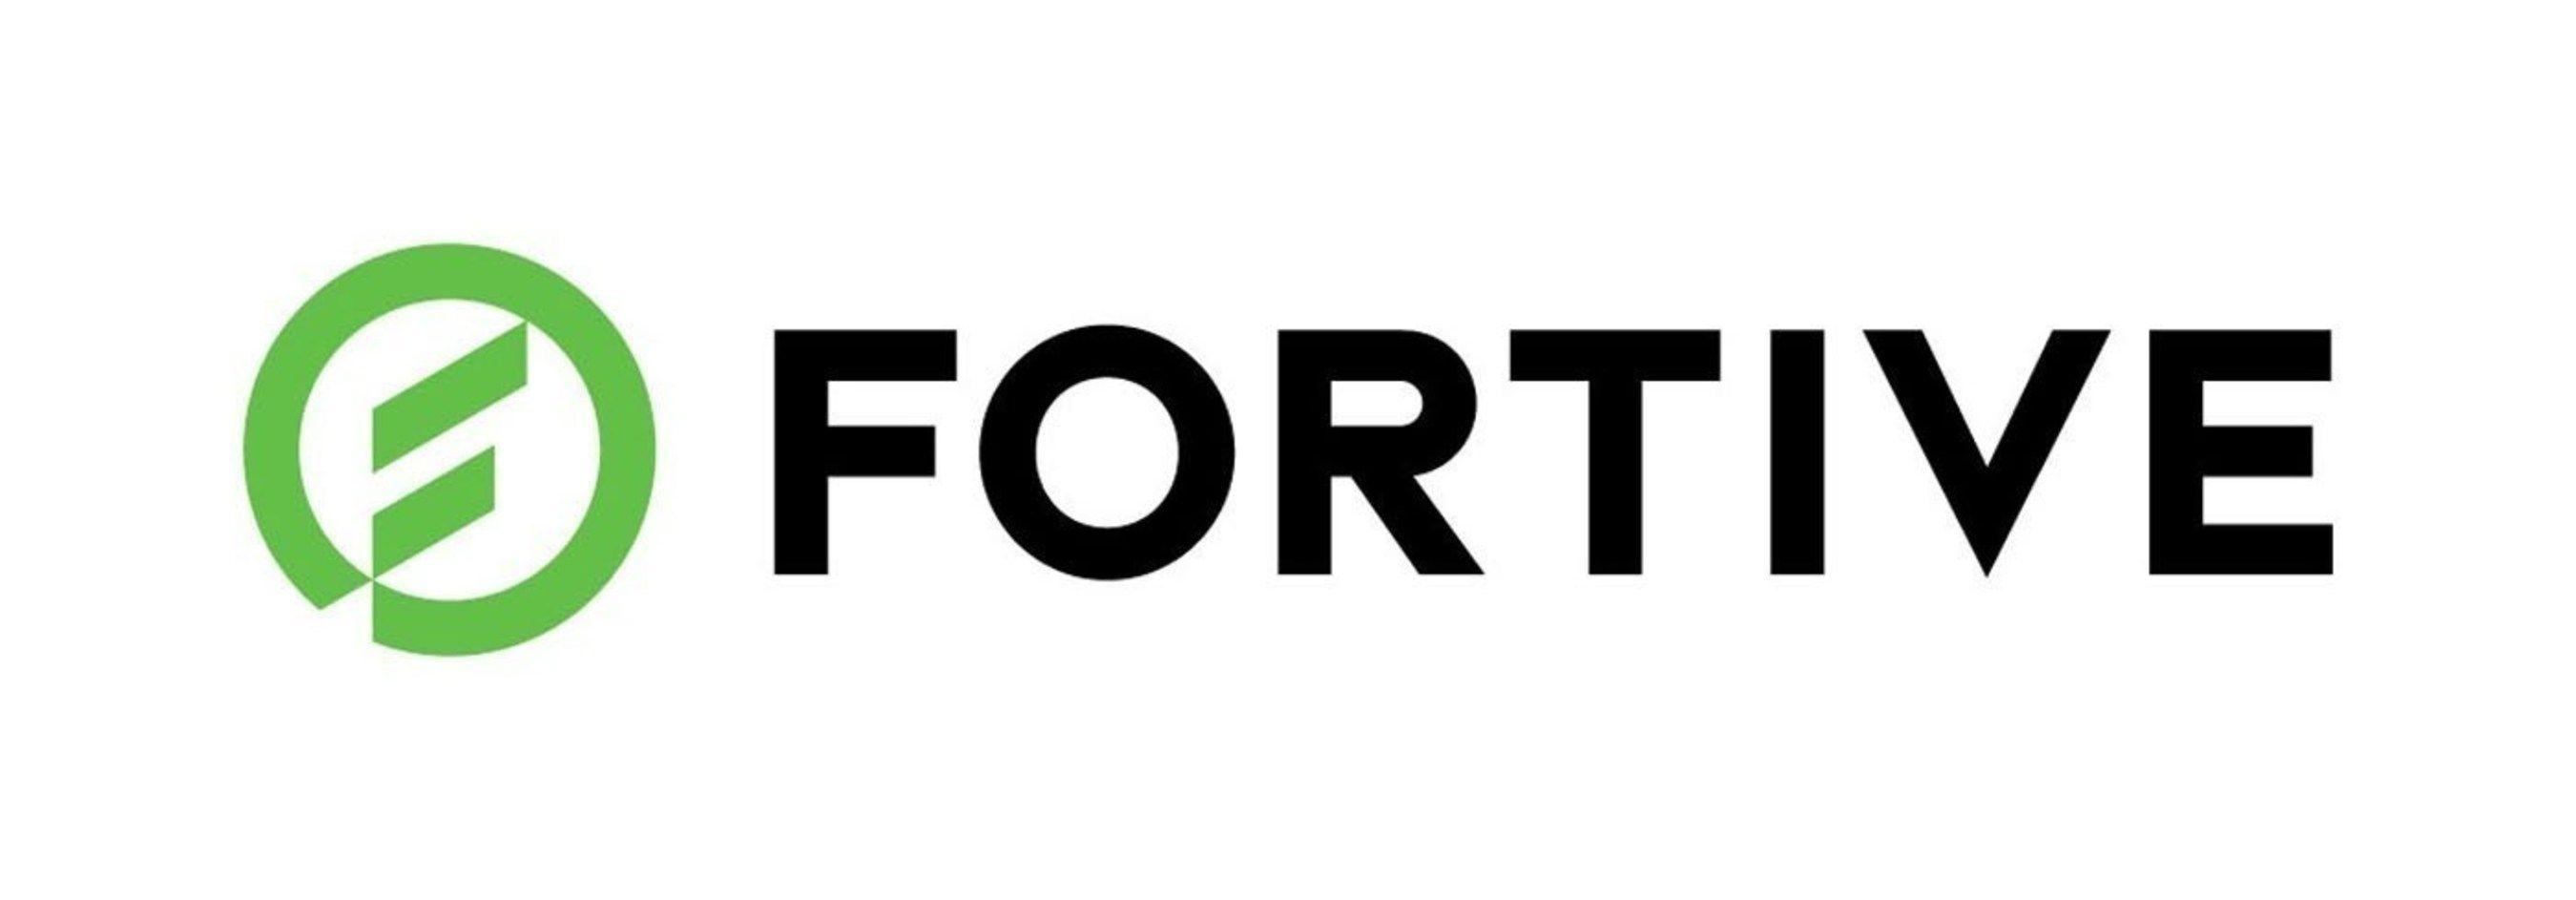 Fortive Logo - Danaher Announces New Diversified Industrial Growth Company To Be